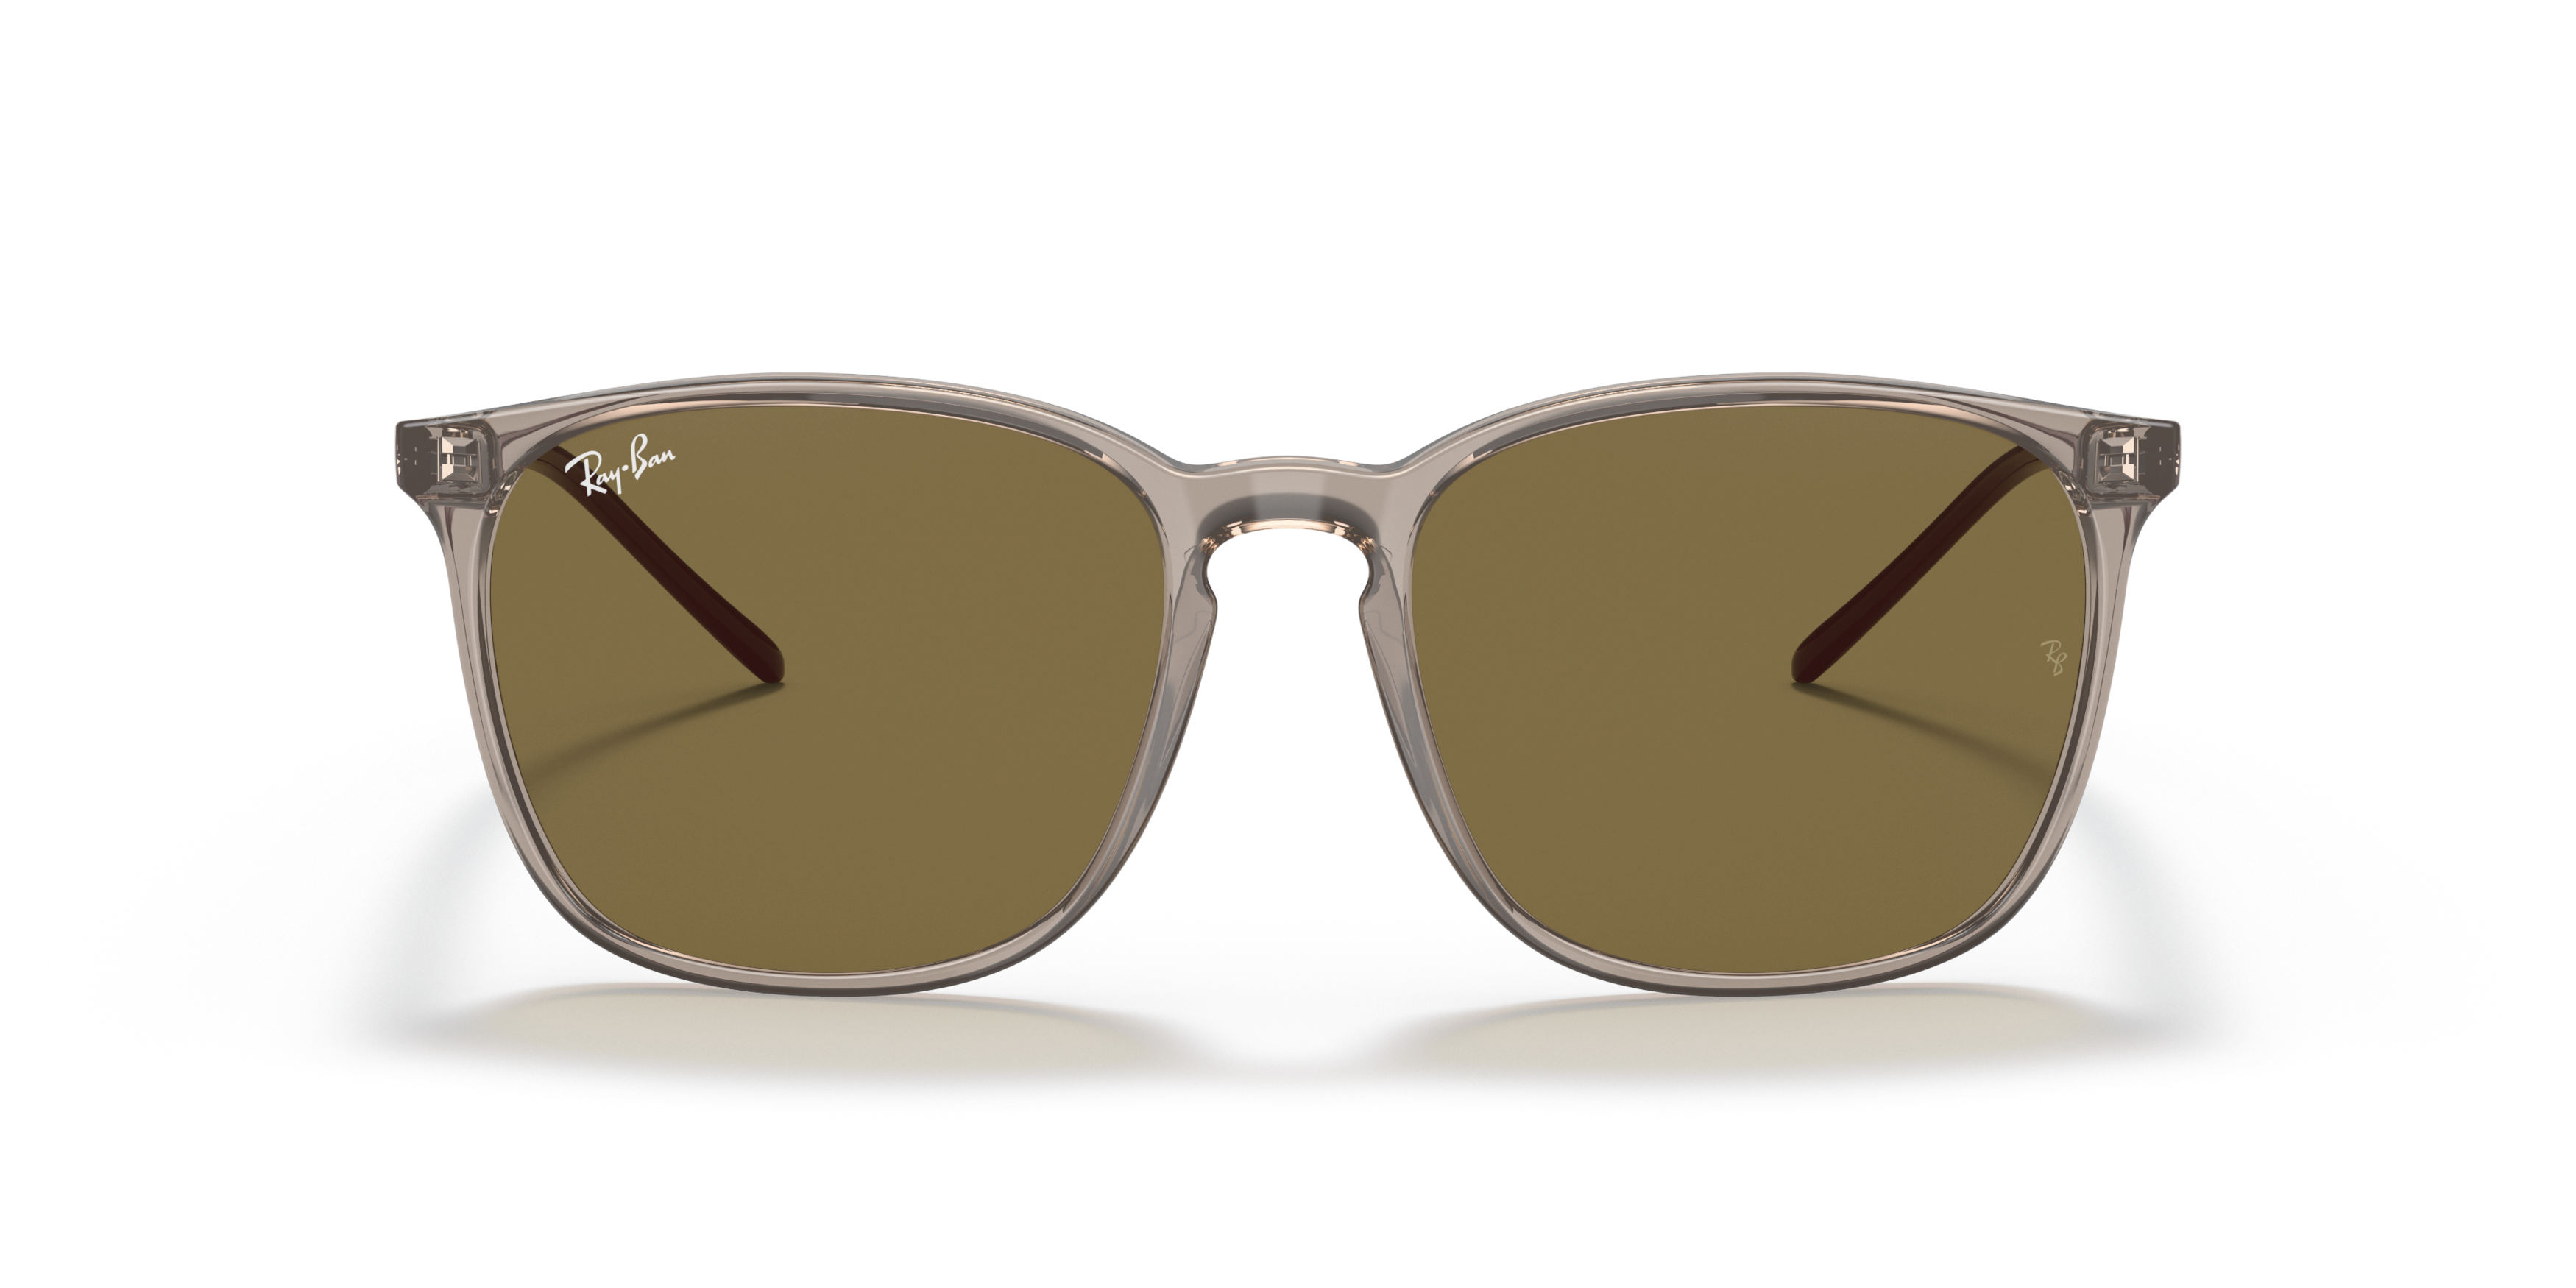 [products.image.front] Ray-Ban RB4387 657273